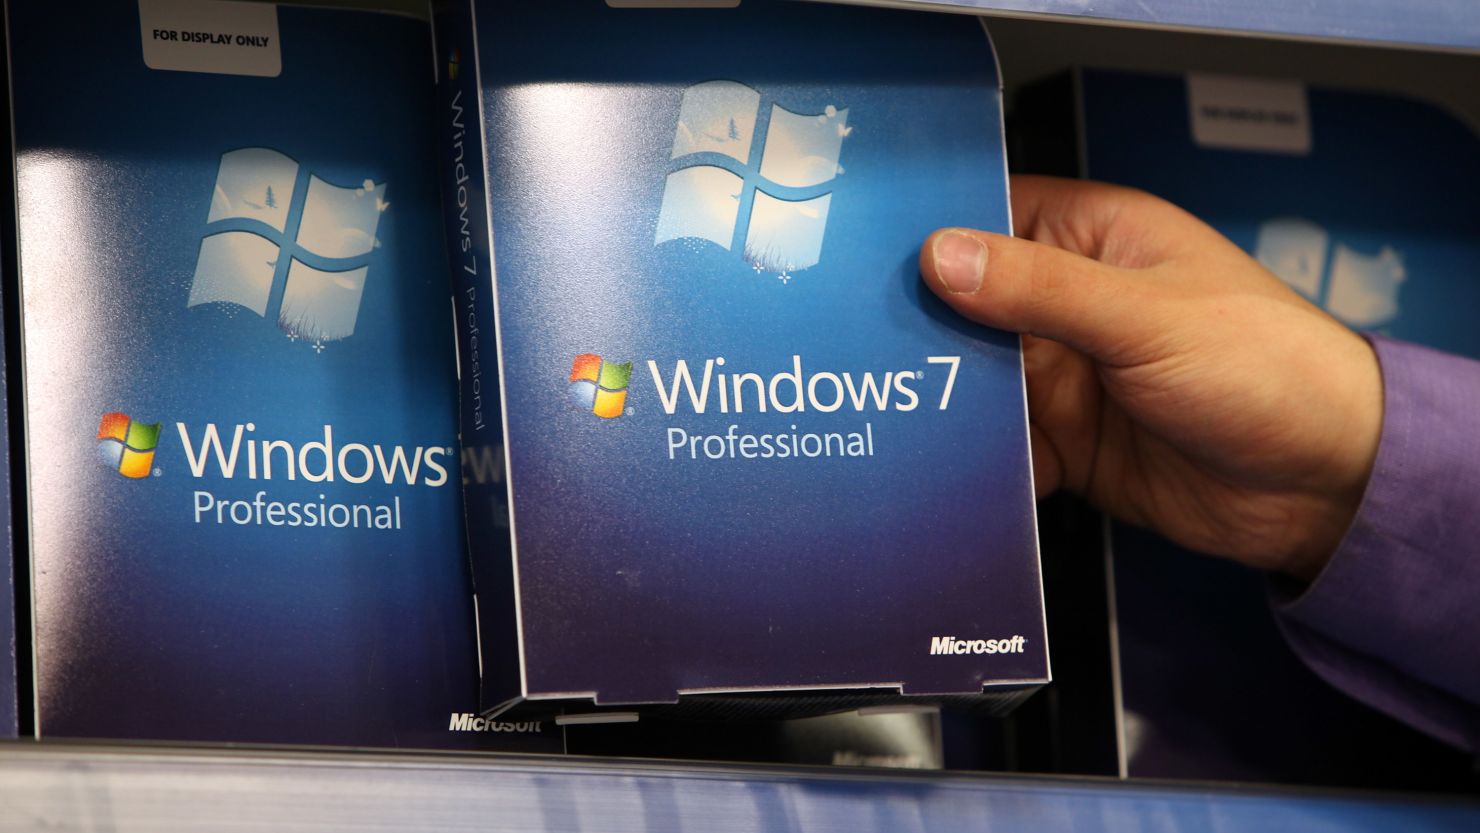 Three years after it went on sale, Windows 7 is now the world's most used desktop operating system.